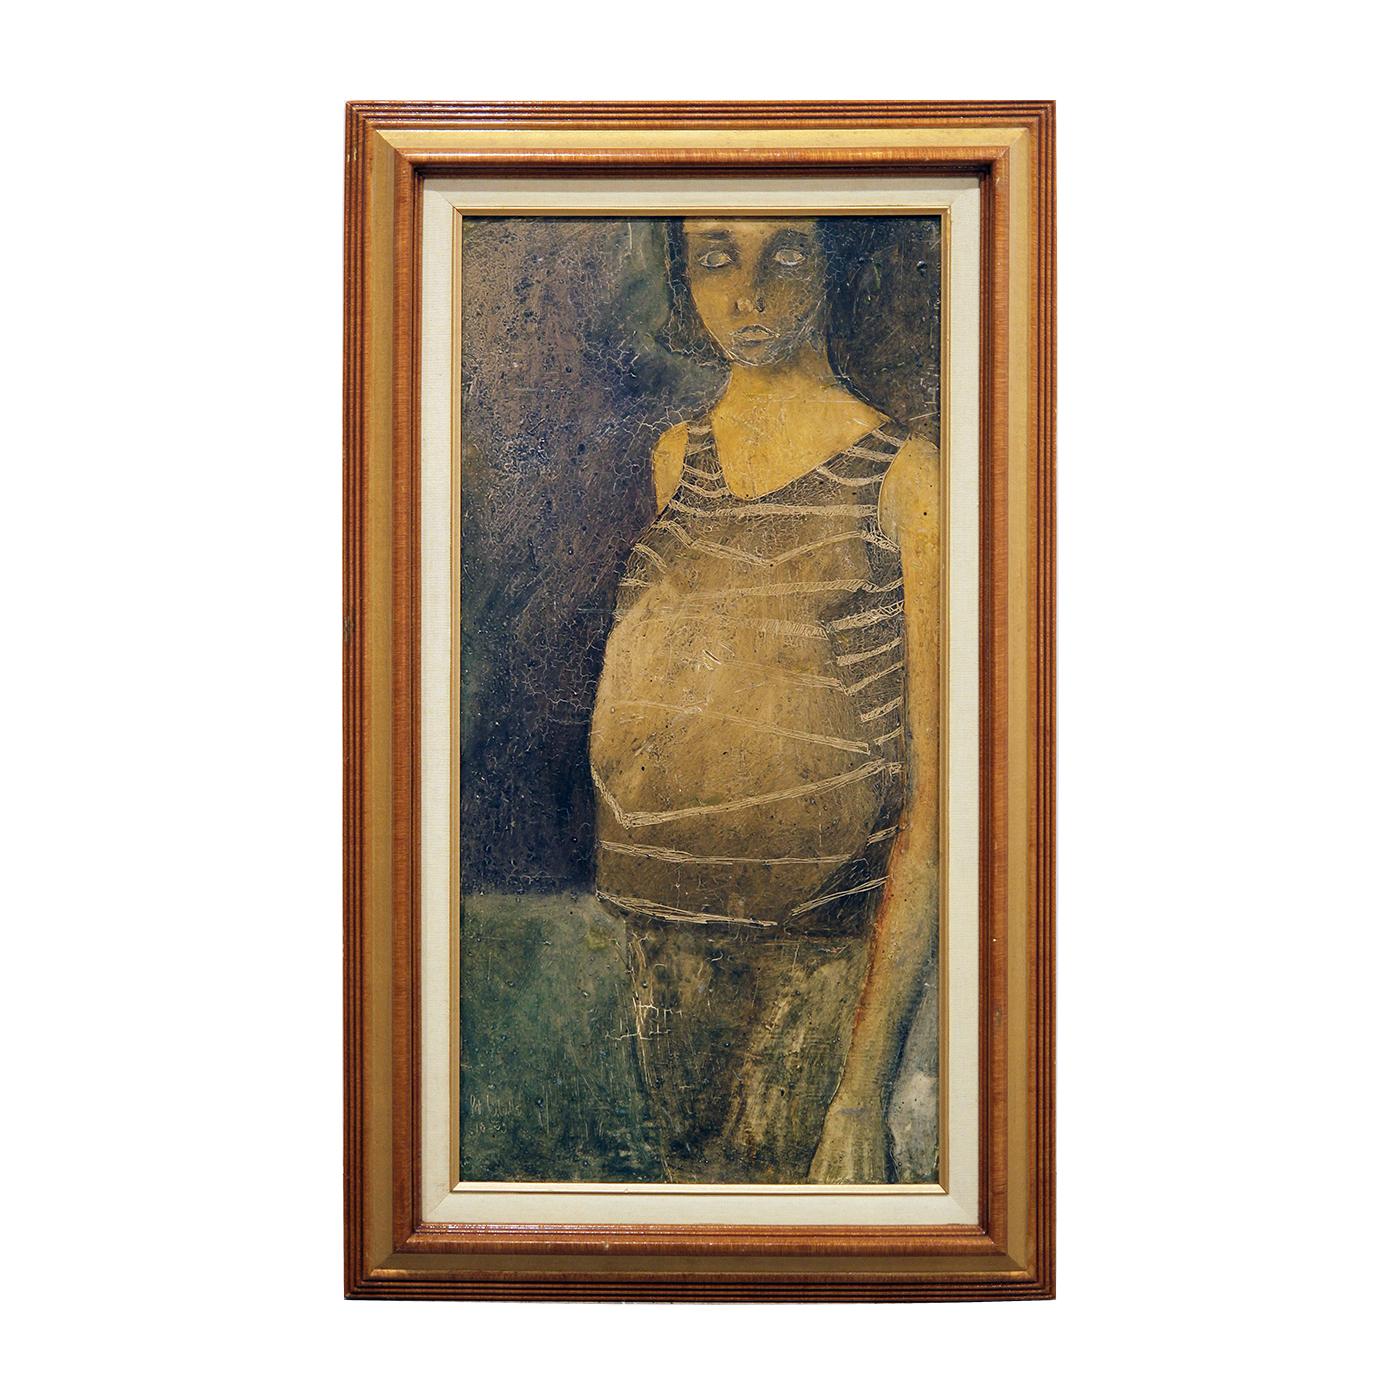 Pat Colville Portrait Painting - Small Longitudinal Dark Toned Abstract Portrait of a Pregnant Woman